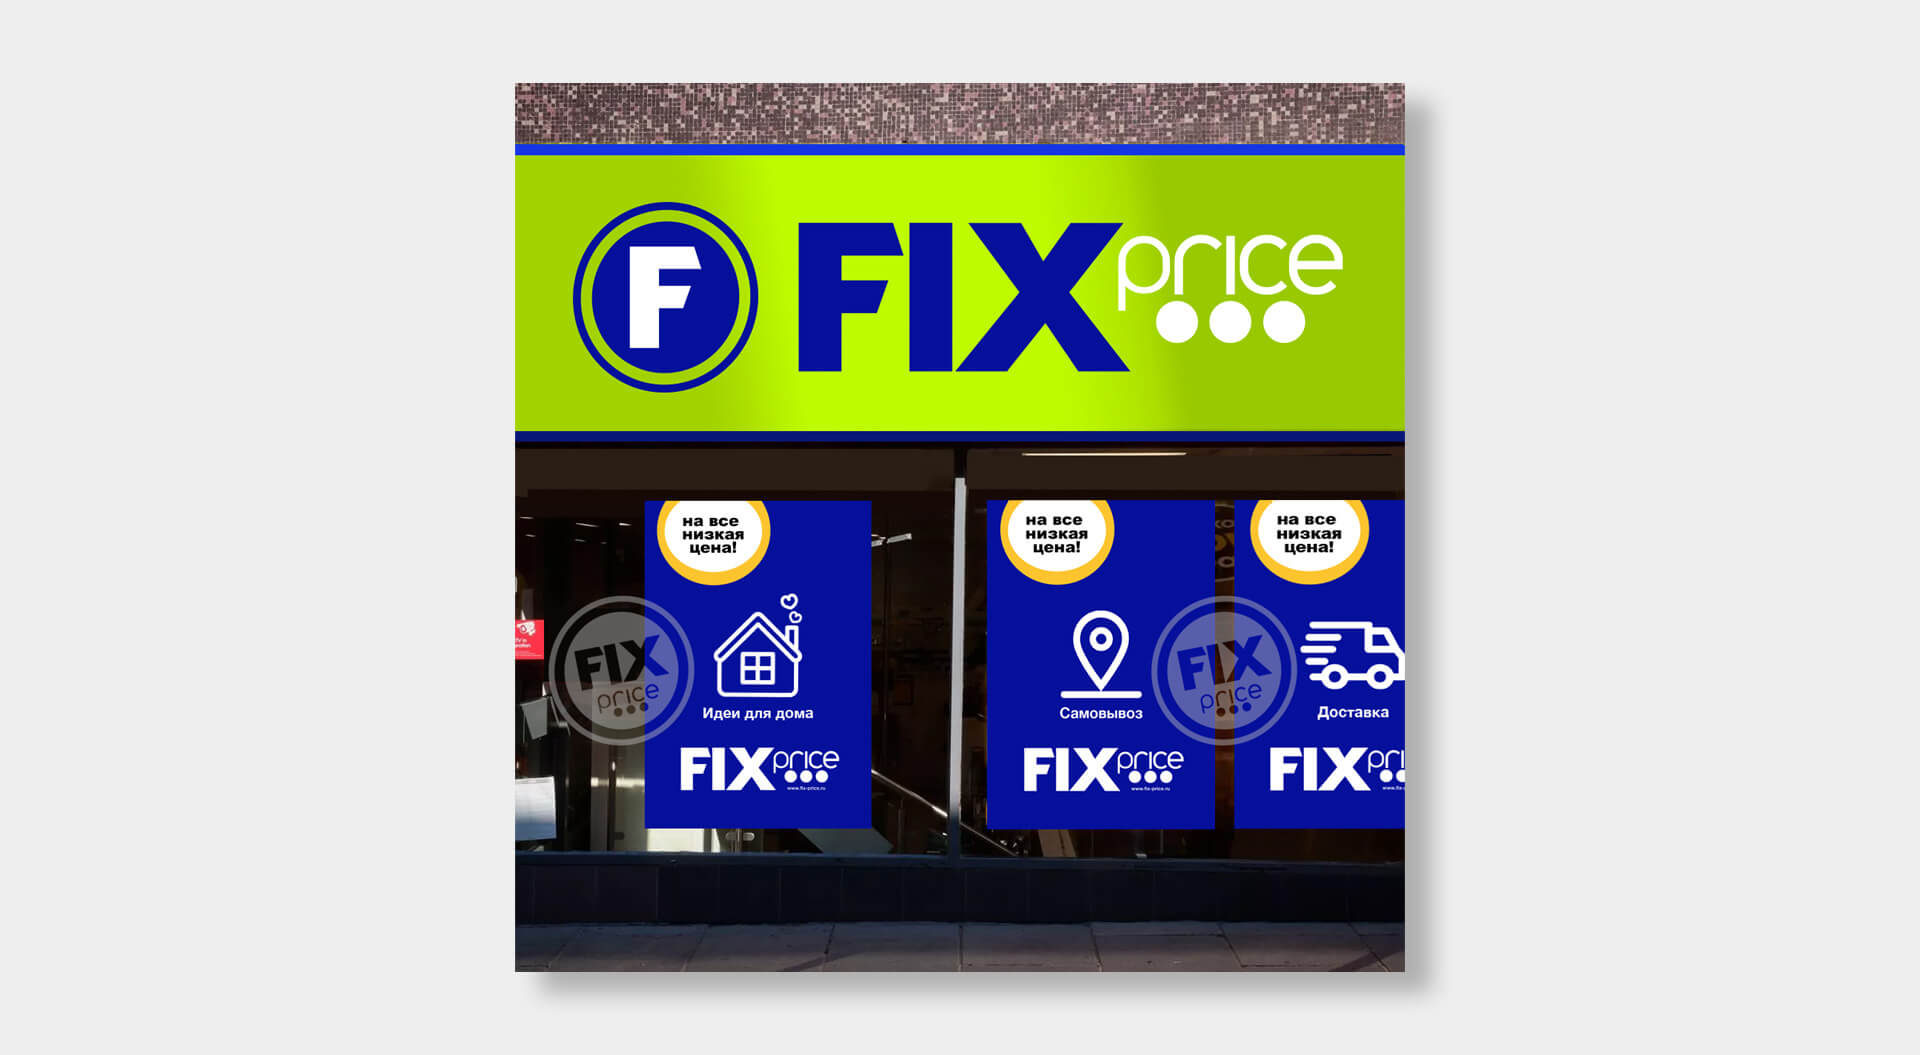 Fix Price Russia, Icon Design for Click and Collect Promotion, Retail Branding, Brand Identity, Graphic Communications - CampbellRigg Agency